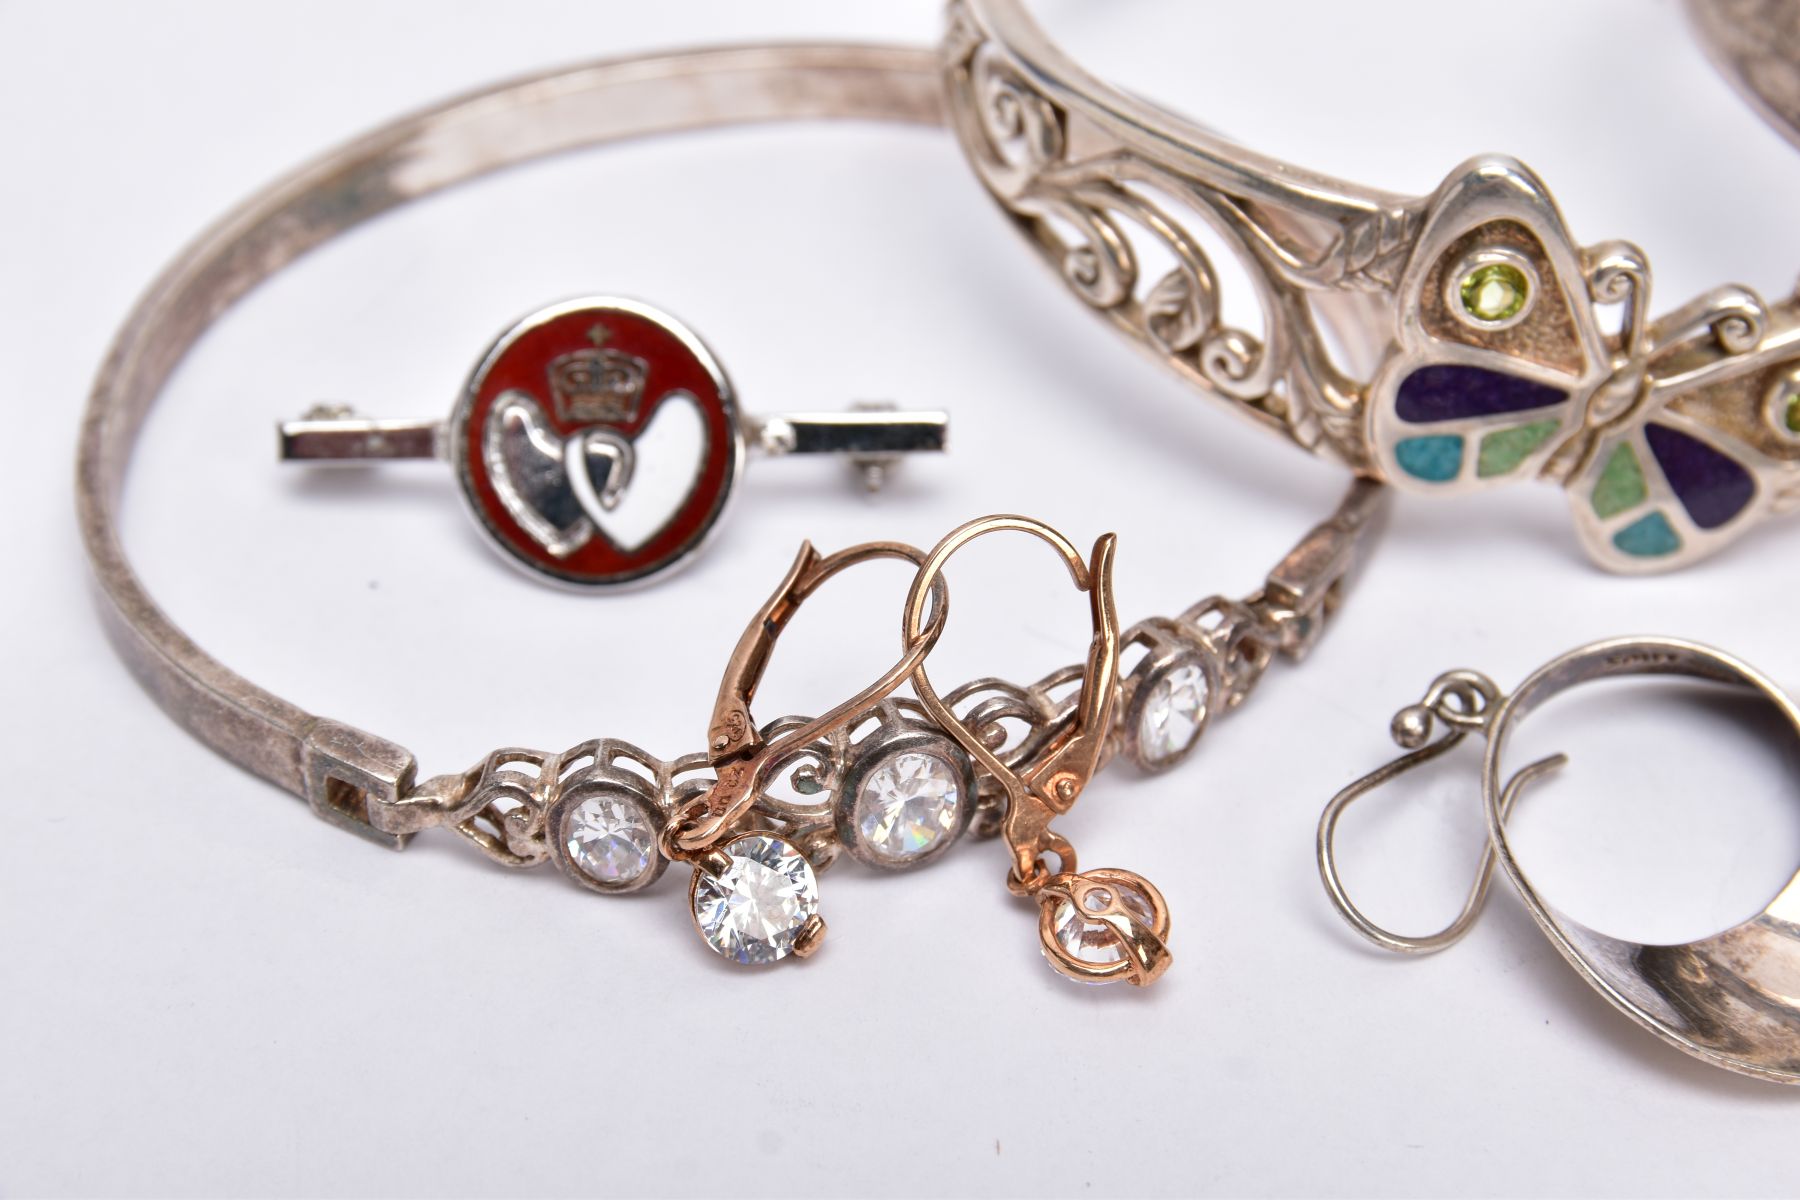 A SMALL QUANTITY OF JEWELLERY, to include a silver hinged bangle with a decorative floral design, - Image 2 of 3